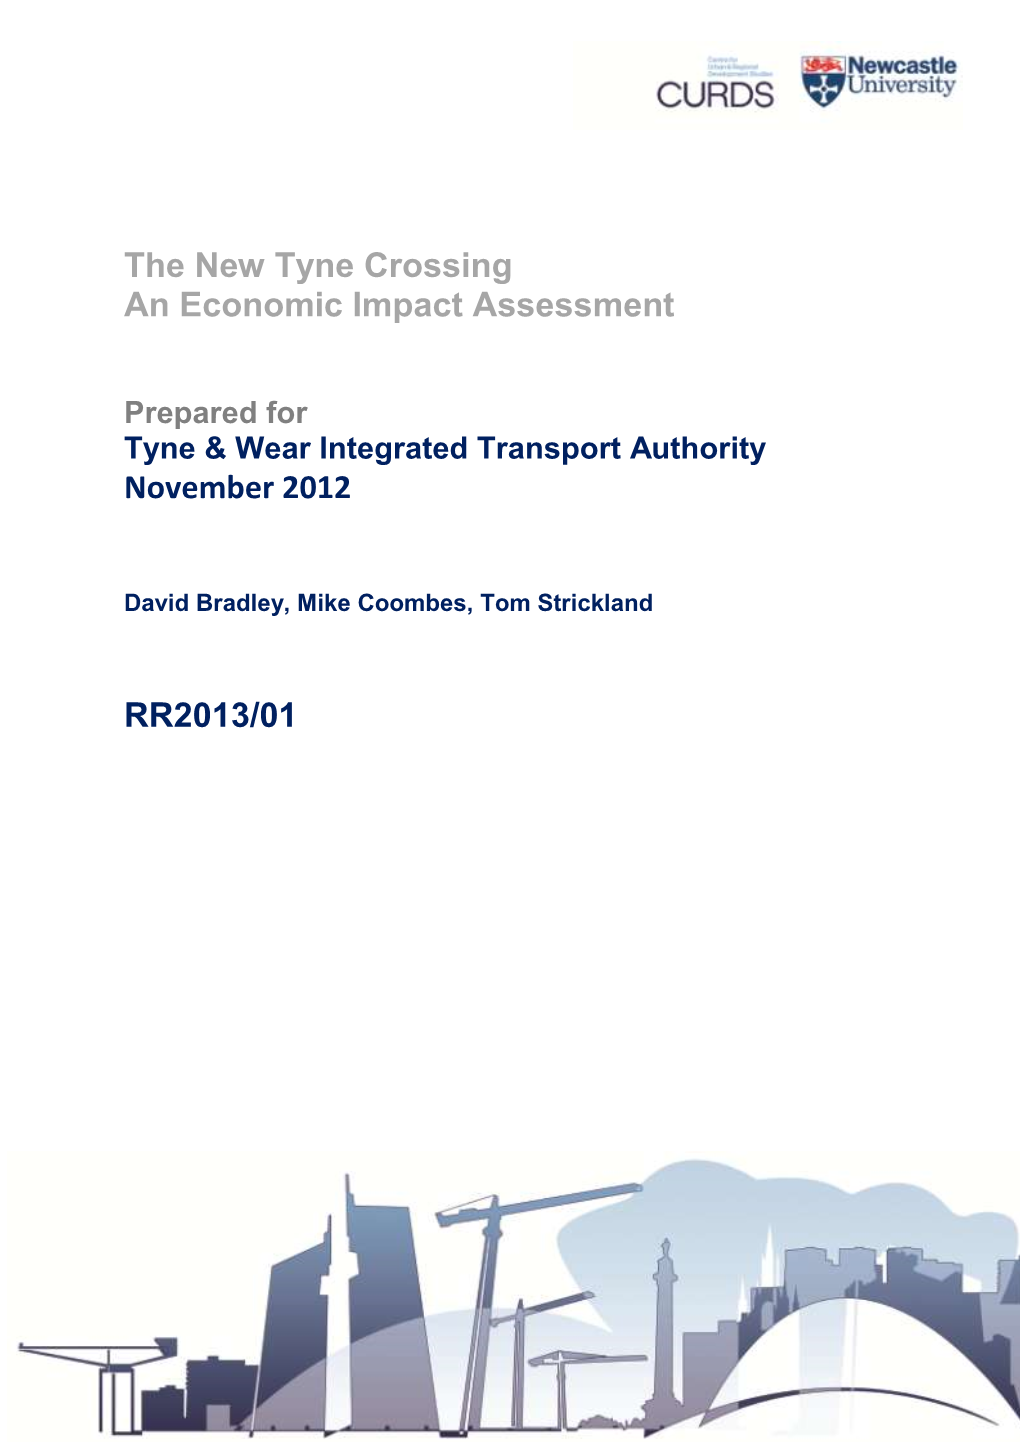 The New Tyne Crossing: an Economic Impact Assessment